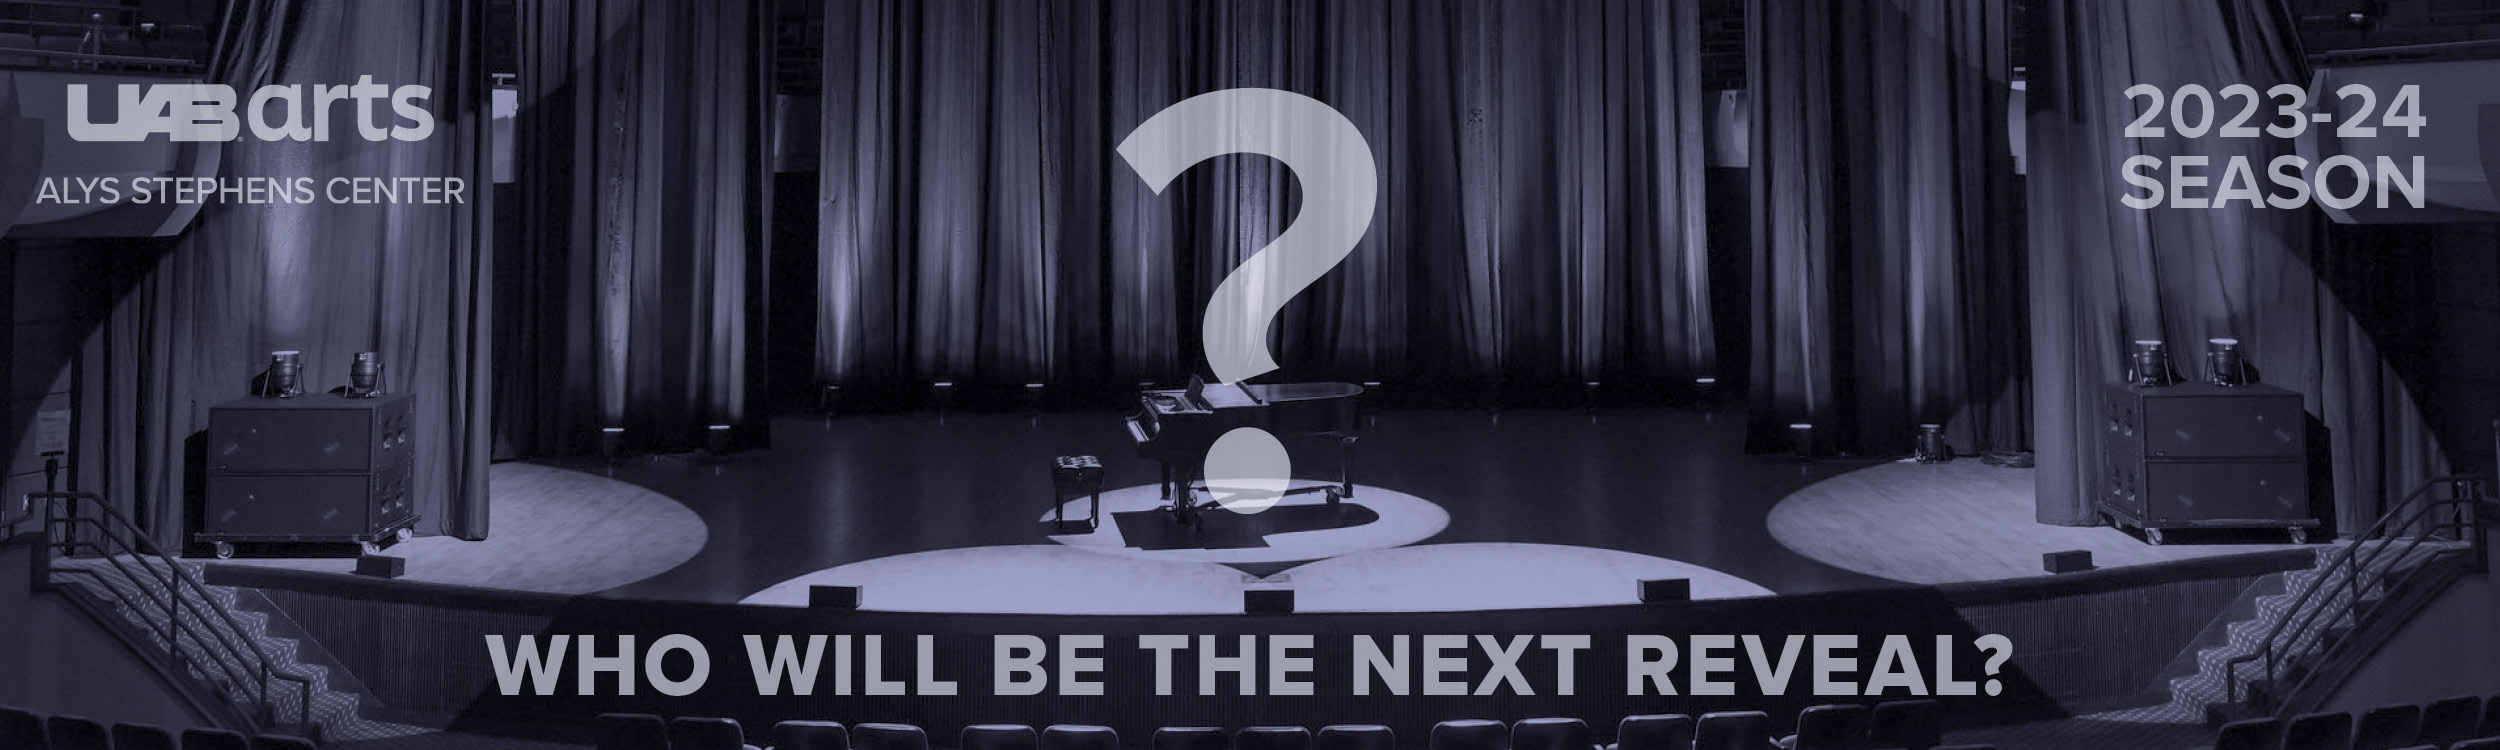 Who will be announced next for the 2022-23 Season? Find out more!